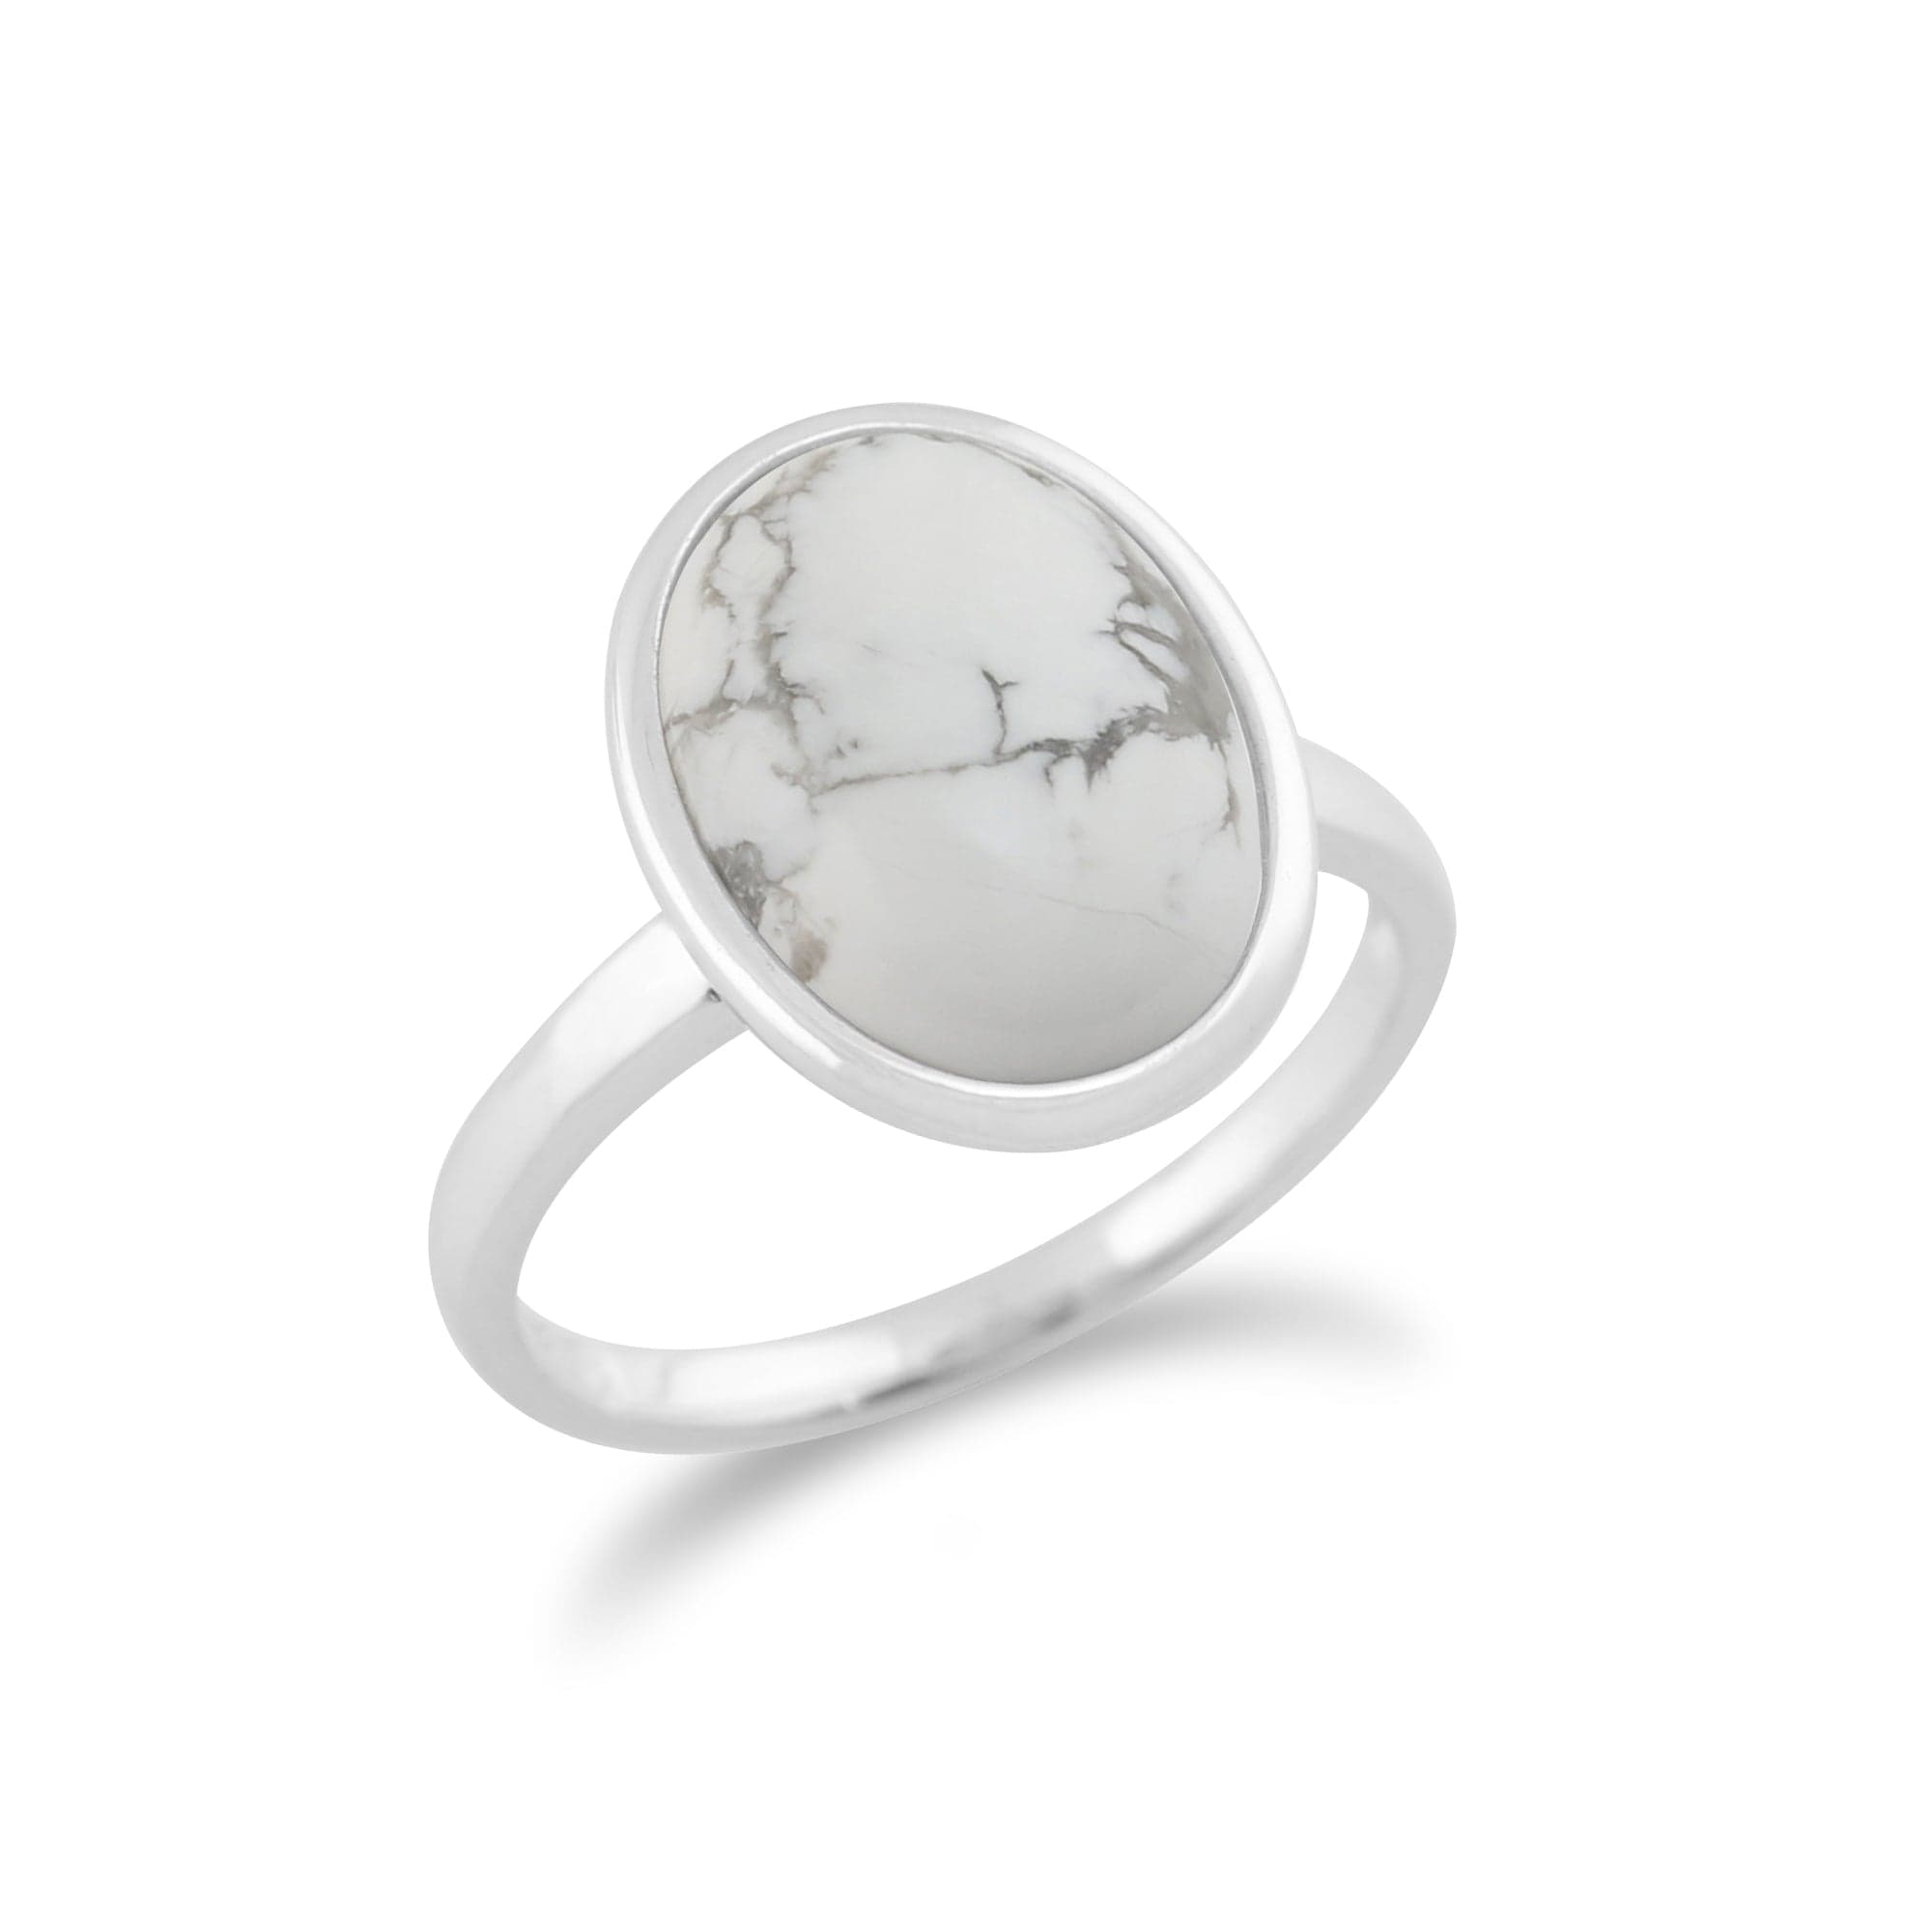 Classic Oval Magnesite Cabochon Boho Cocktail Ring in 925 Sterling Silver - Gemondo